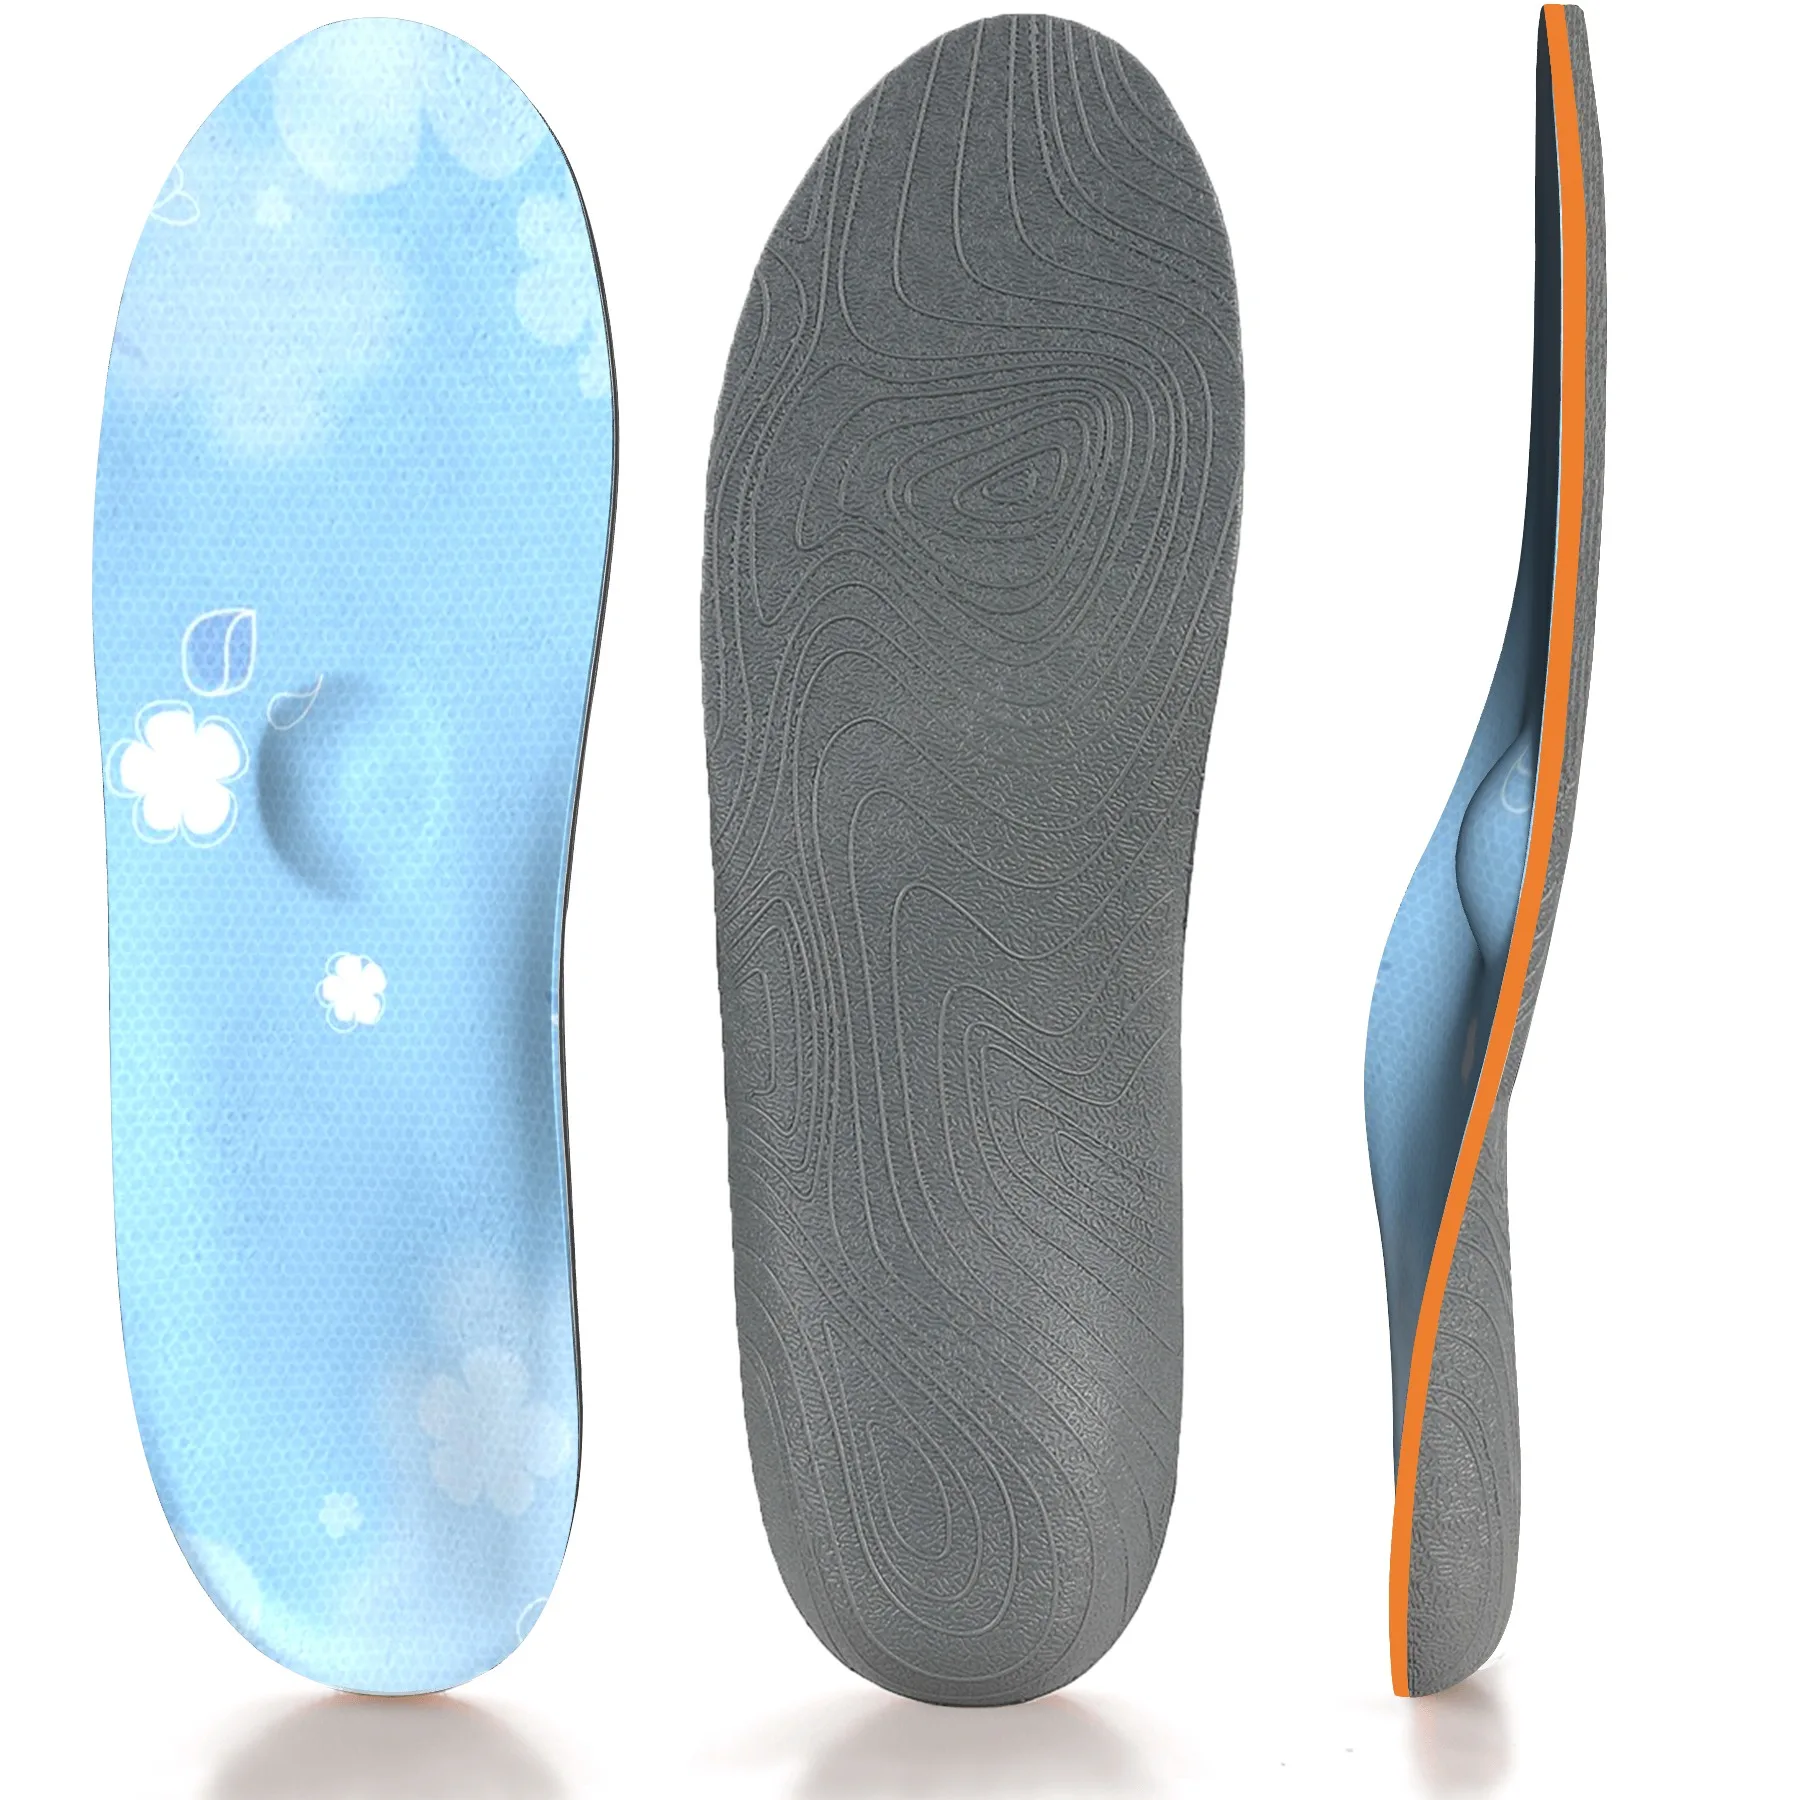 Full-Length SNEAKER Insoles Promote Foot Blood Circulation Playing Football Beauty Shoes